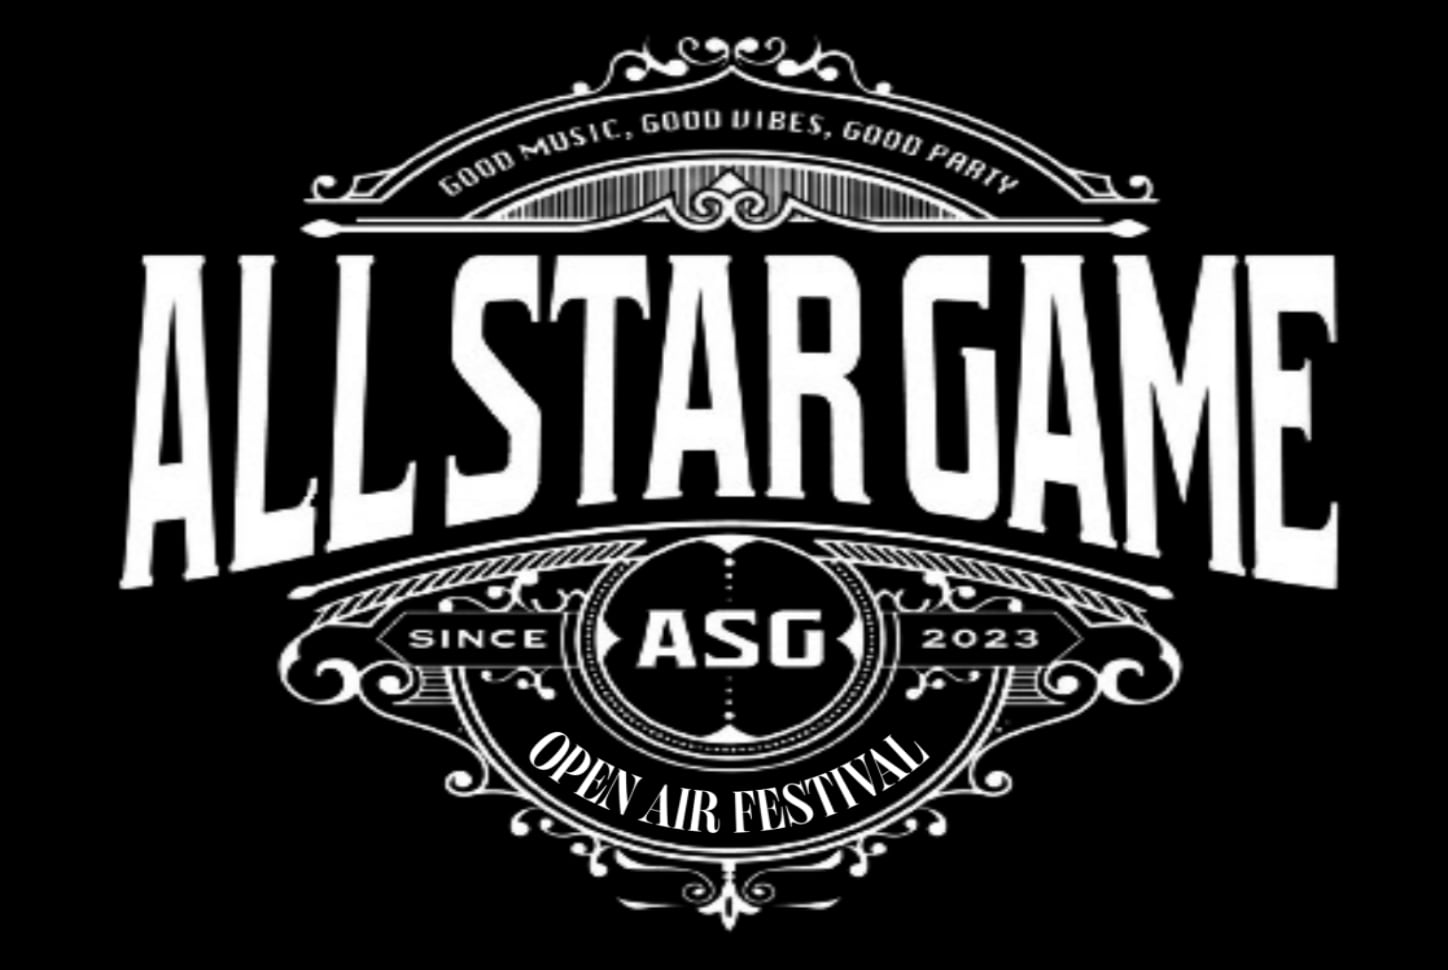 ALL STAR GAME